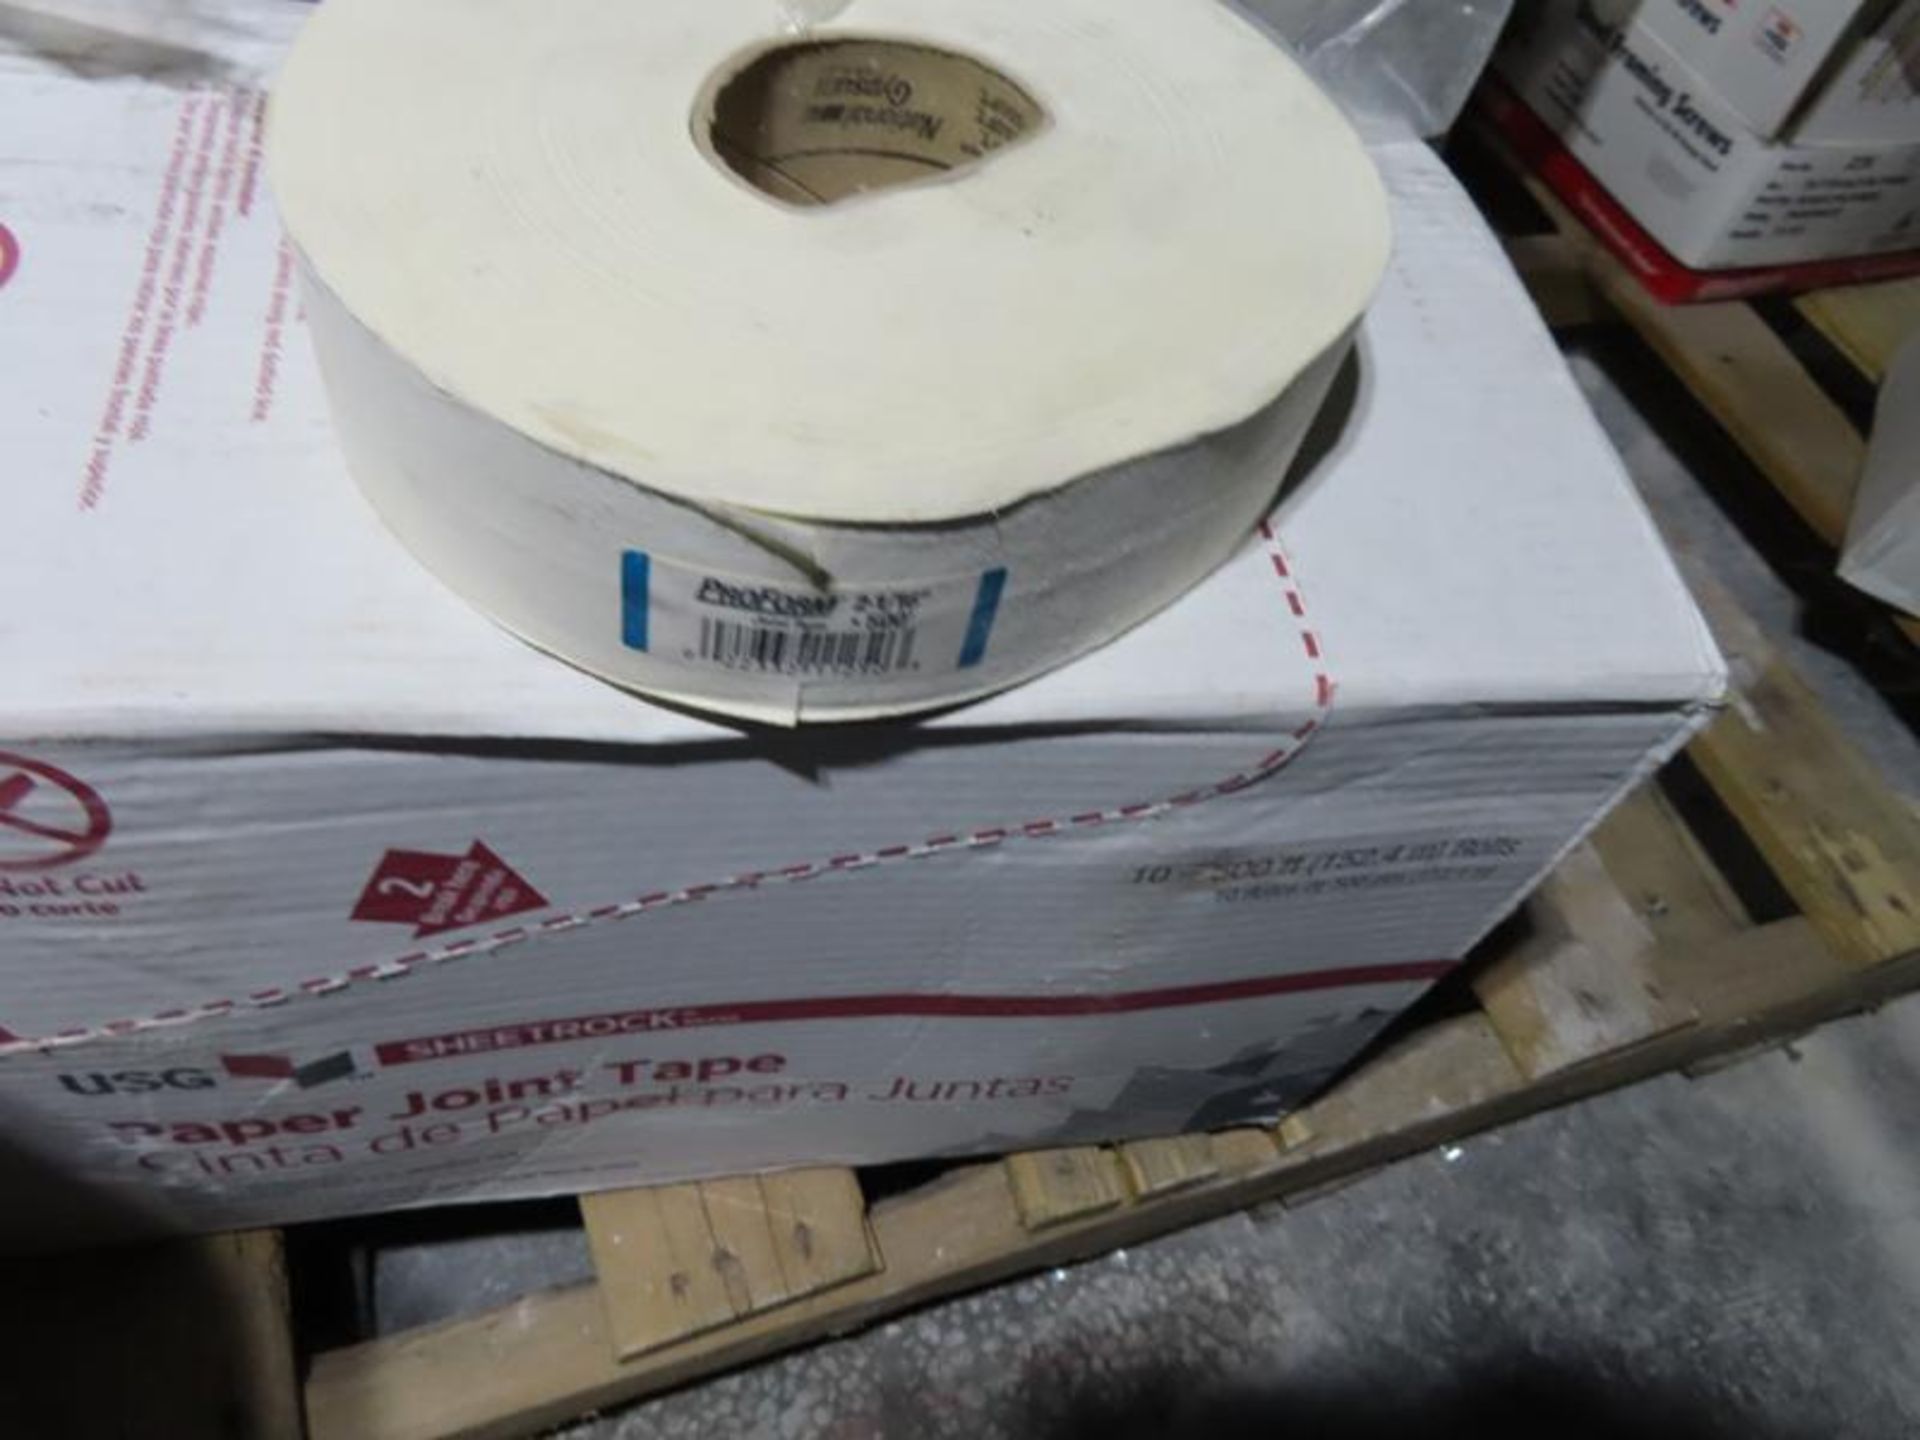 JOINT TAPE, ALL PURPOSE SHEET ROCK COMPOUND, EASY SAND 90 COMPOUND - 3 PALLETS OF MISC COMPOUND MARK - Image 4 of 6